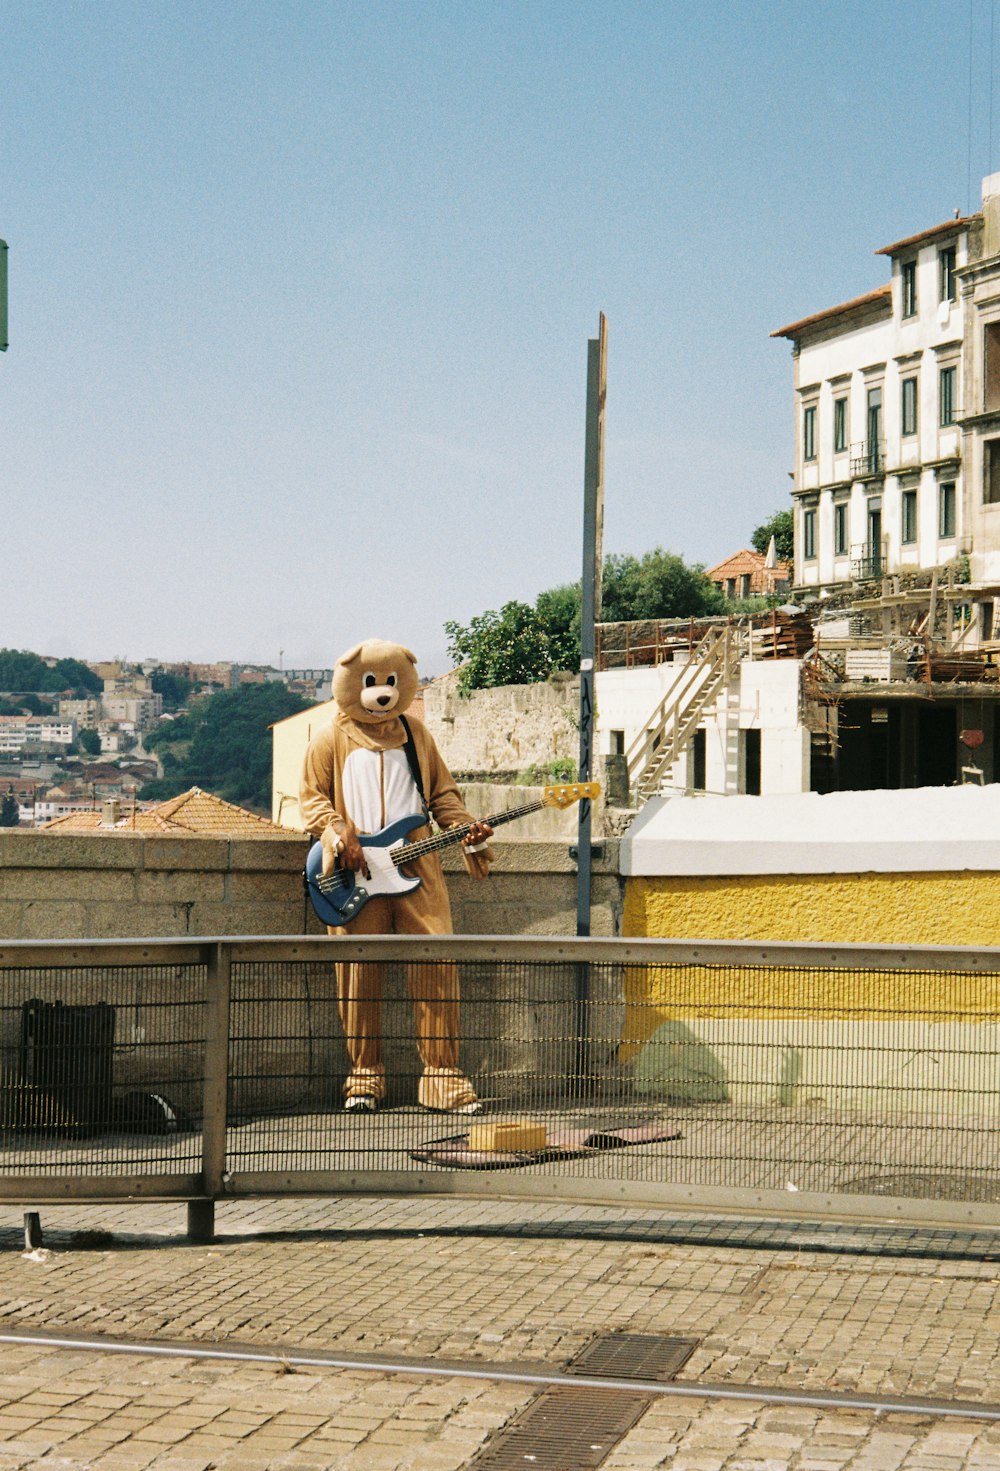 a man in a bear costume is playing a guitar